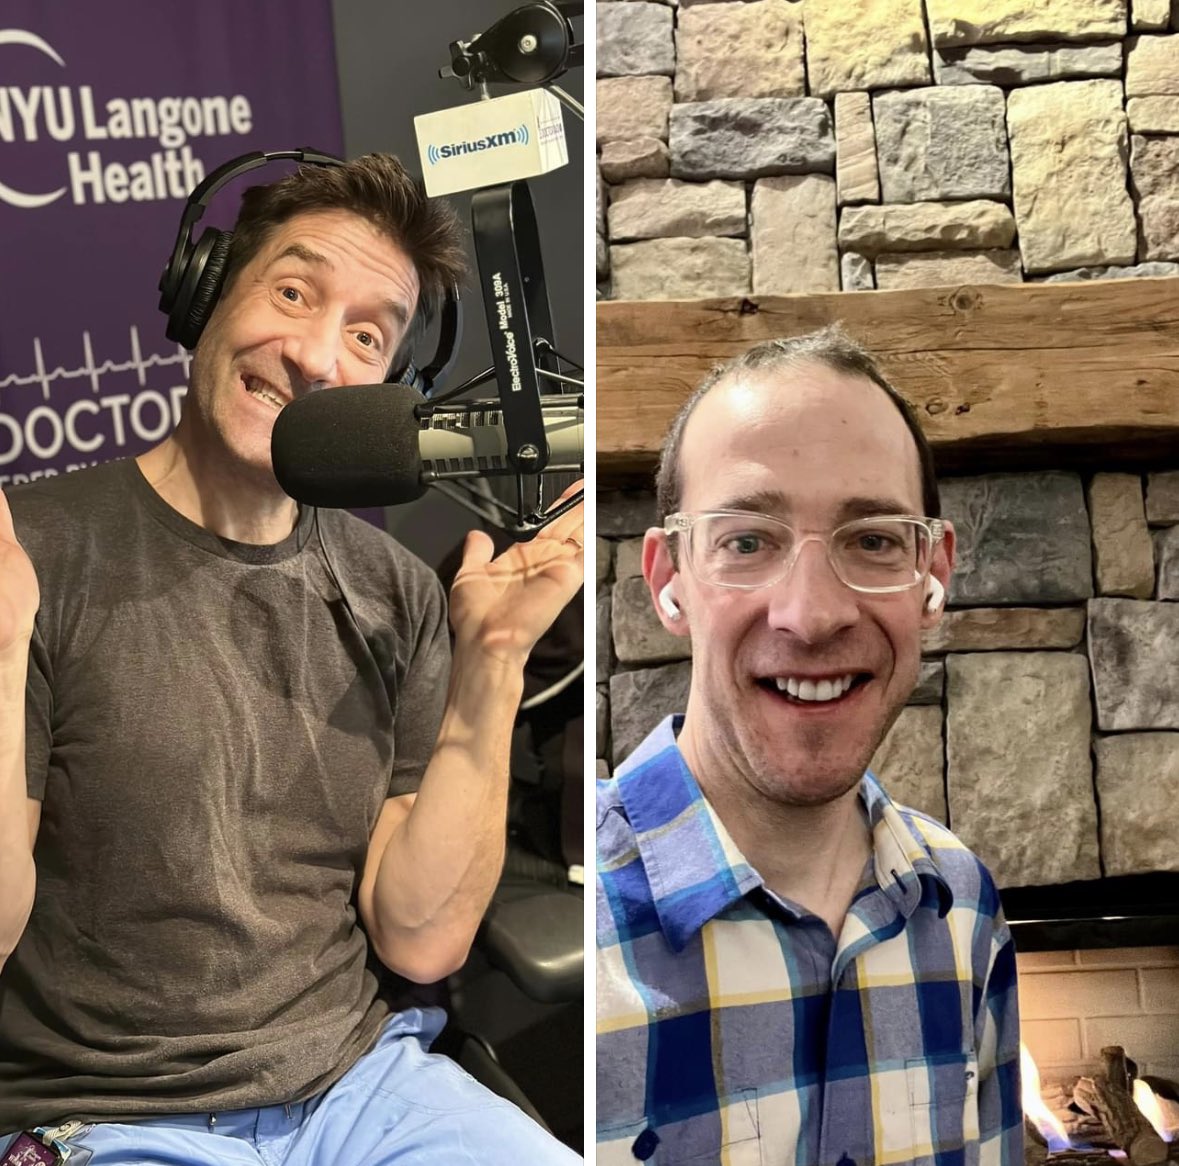 Ain’t now sunshine when @heshiegreshie is gone… or is there? Emergency Medicine’s @askdrbilly is joined this week by ER doc @Chris_McStay ☀️on Thurs morning 8-10am ET. Have you ever had a freak accident? One caller shares a food prep-related medical emergency with us. 🥑Ouch!